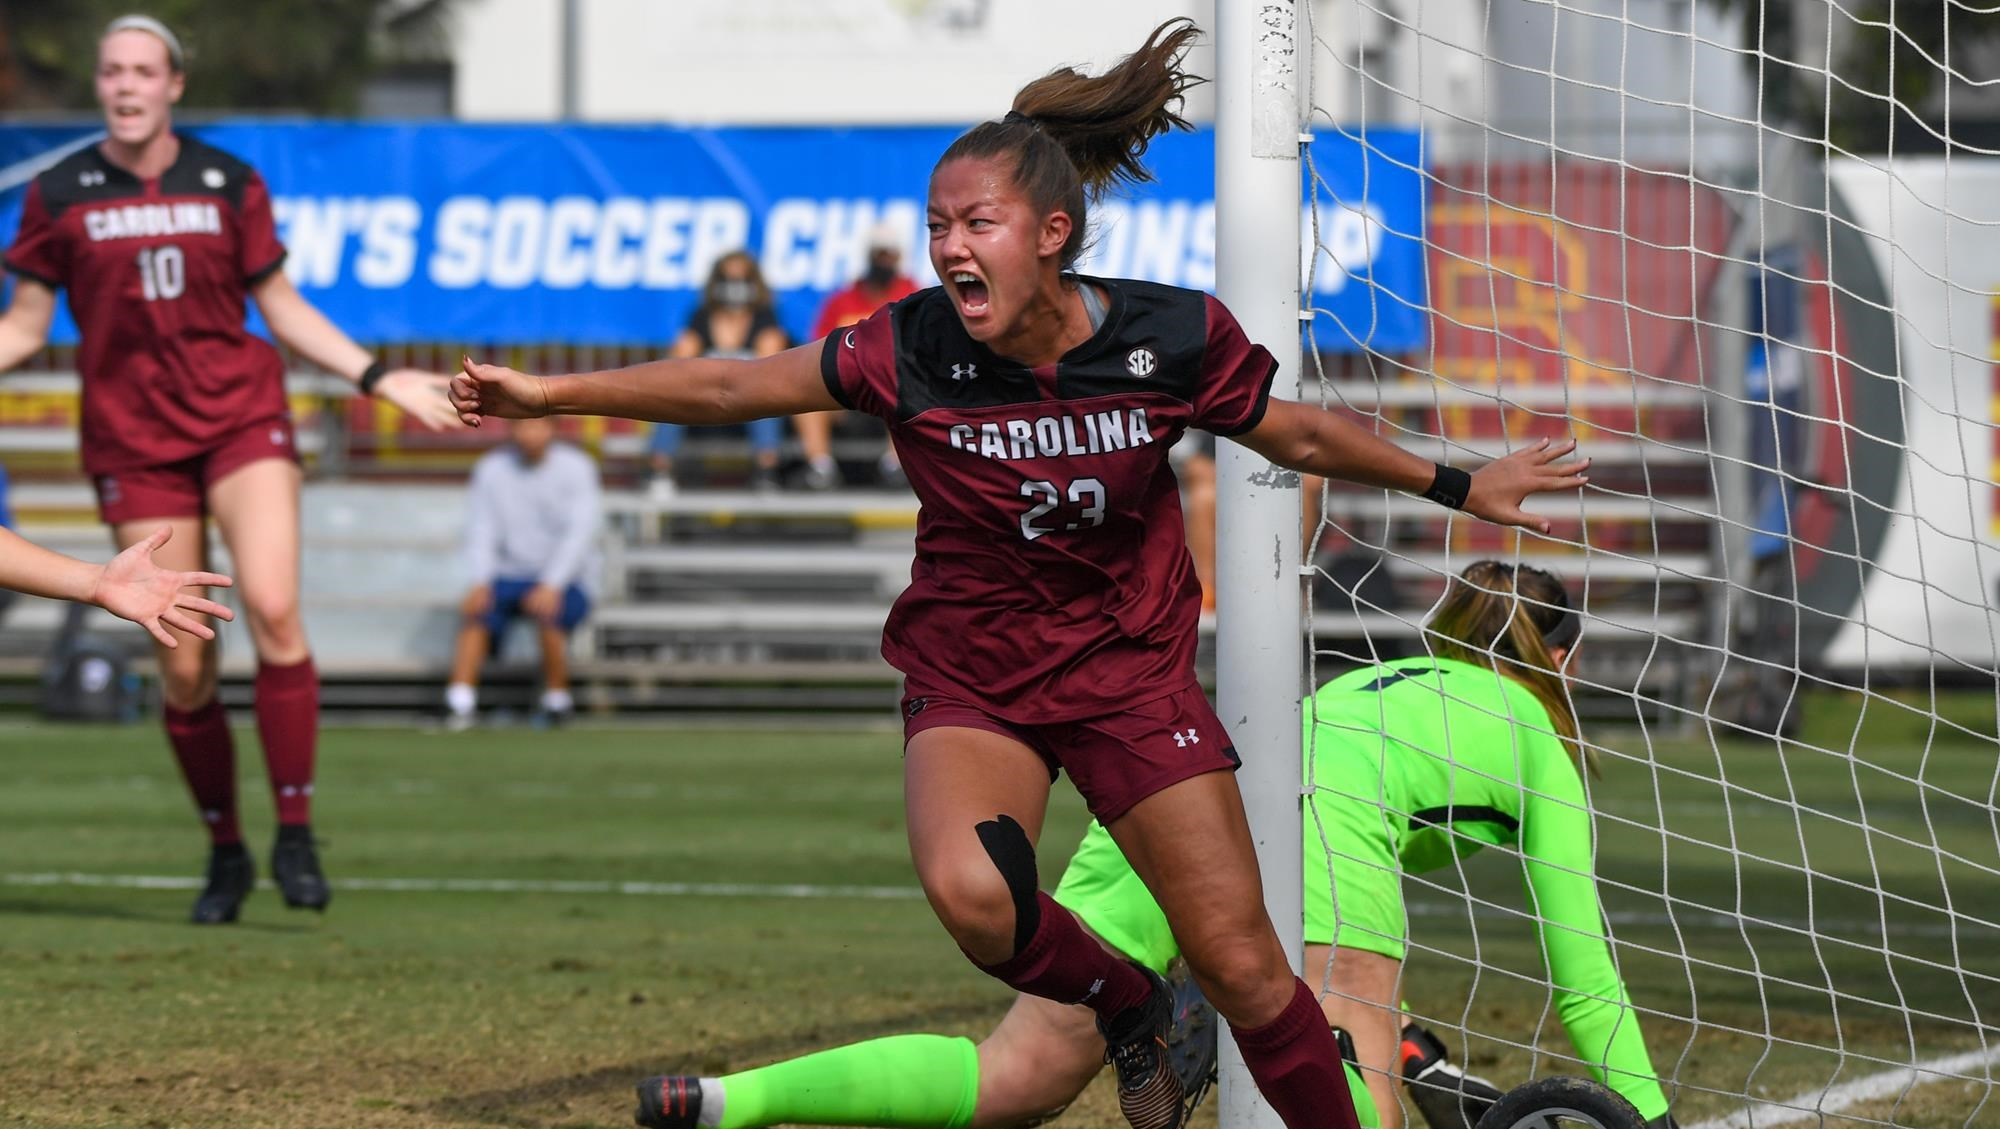 Gamecocks Advance to Sweet Sixteen With 3-0 Victory